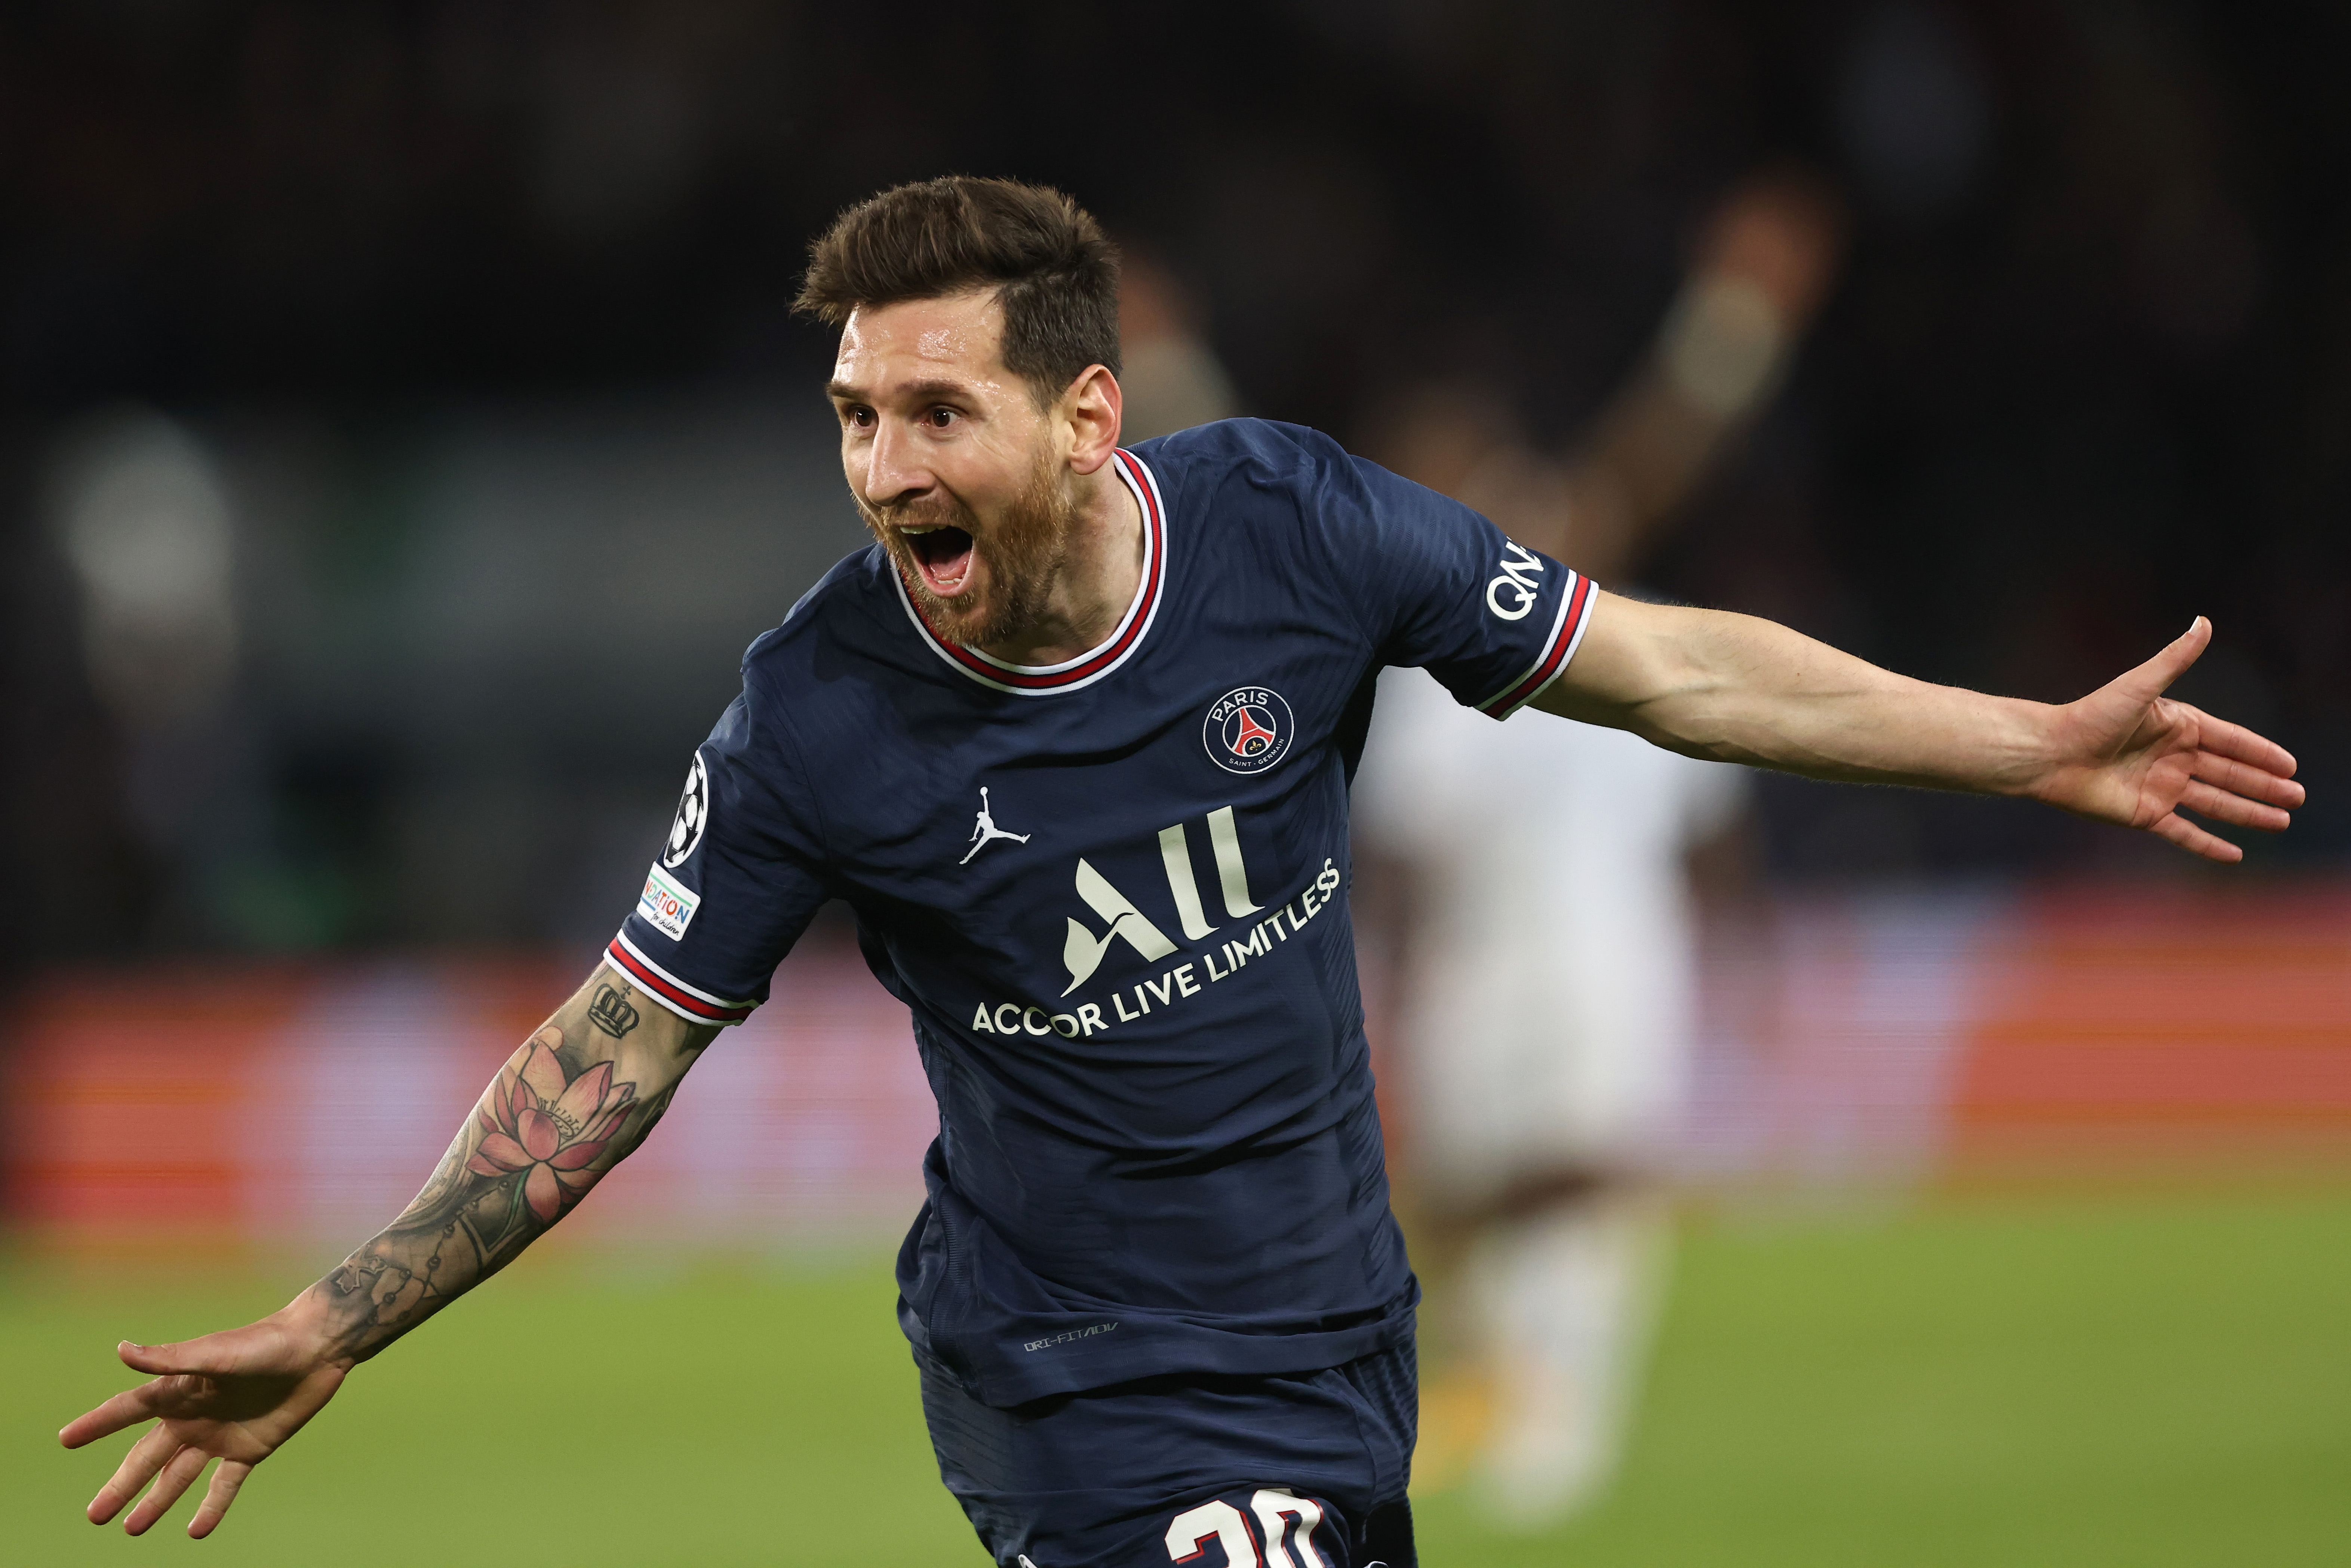 Lionel Messi Scores 1st PSG Goal in 2-0 Champions League Win over Manchester City - Bleacher Report - Latest News, Videos and Highlights